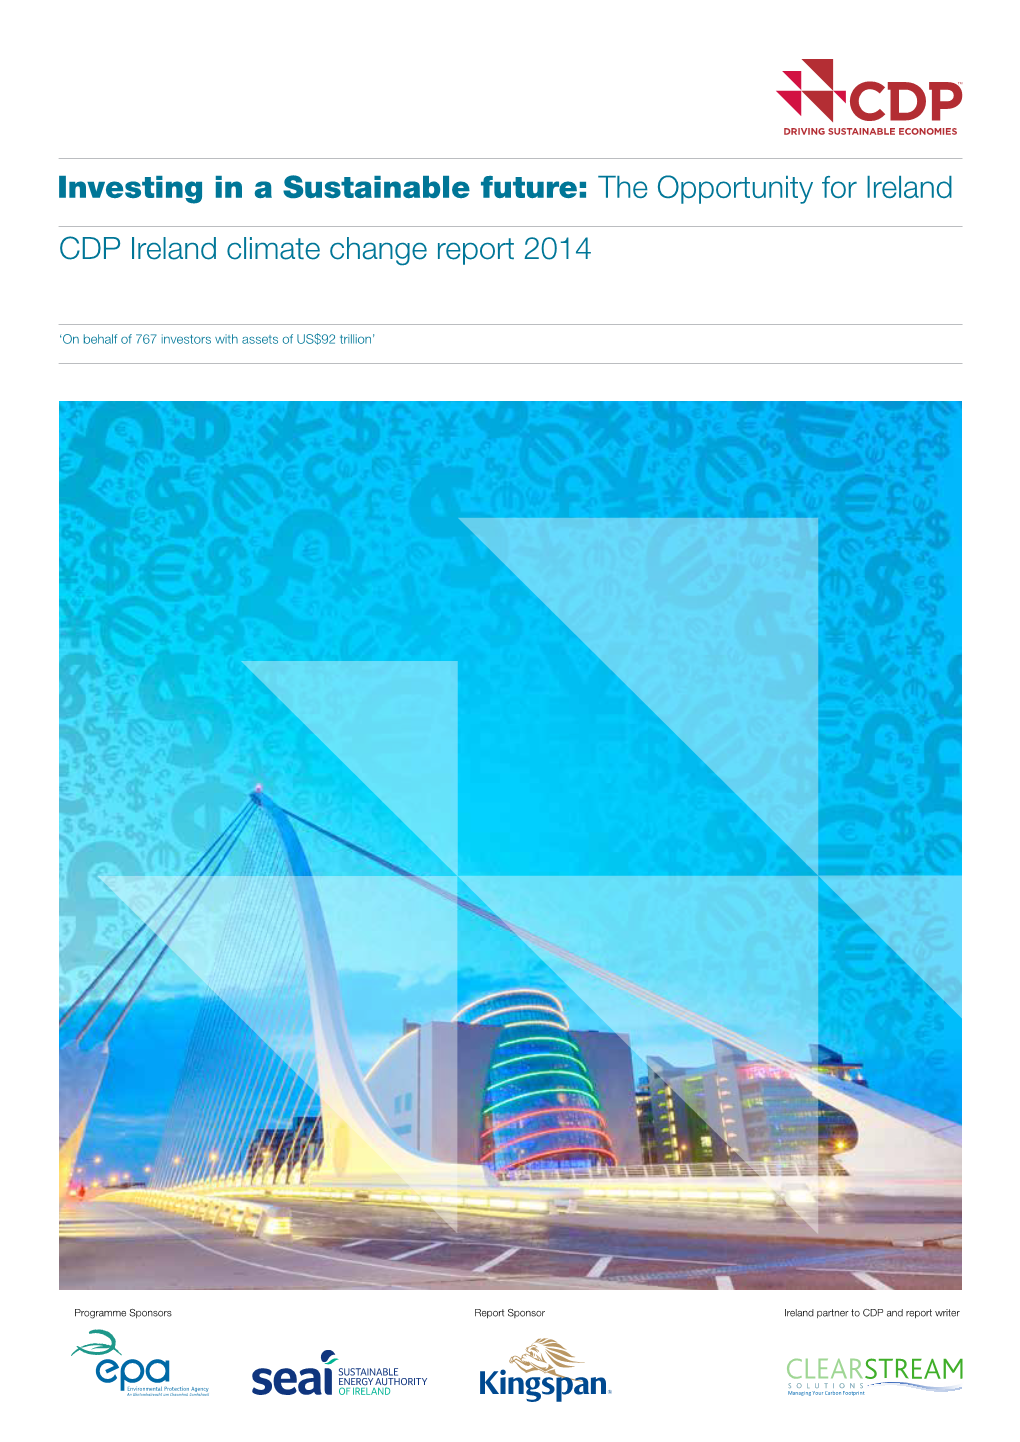 Investing in a Sustainable Future: the Opportunity for Ireland CDP Ireland Climate Change Report 2014